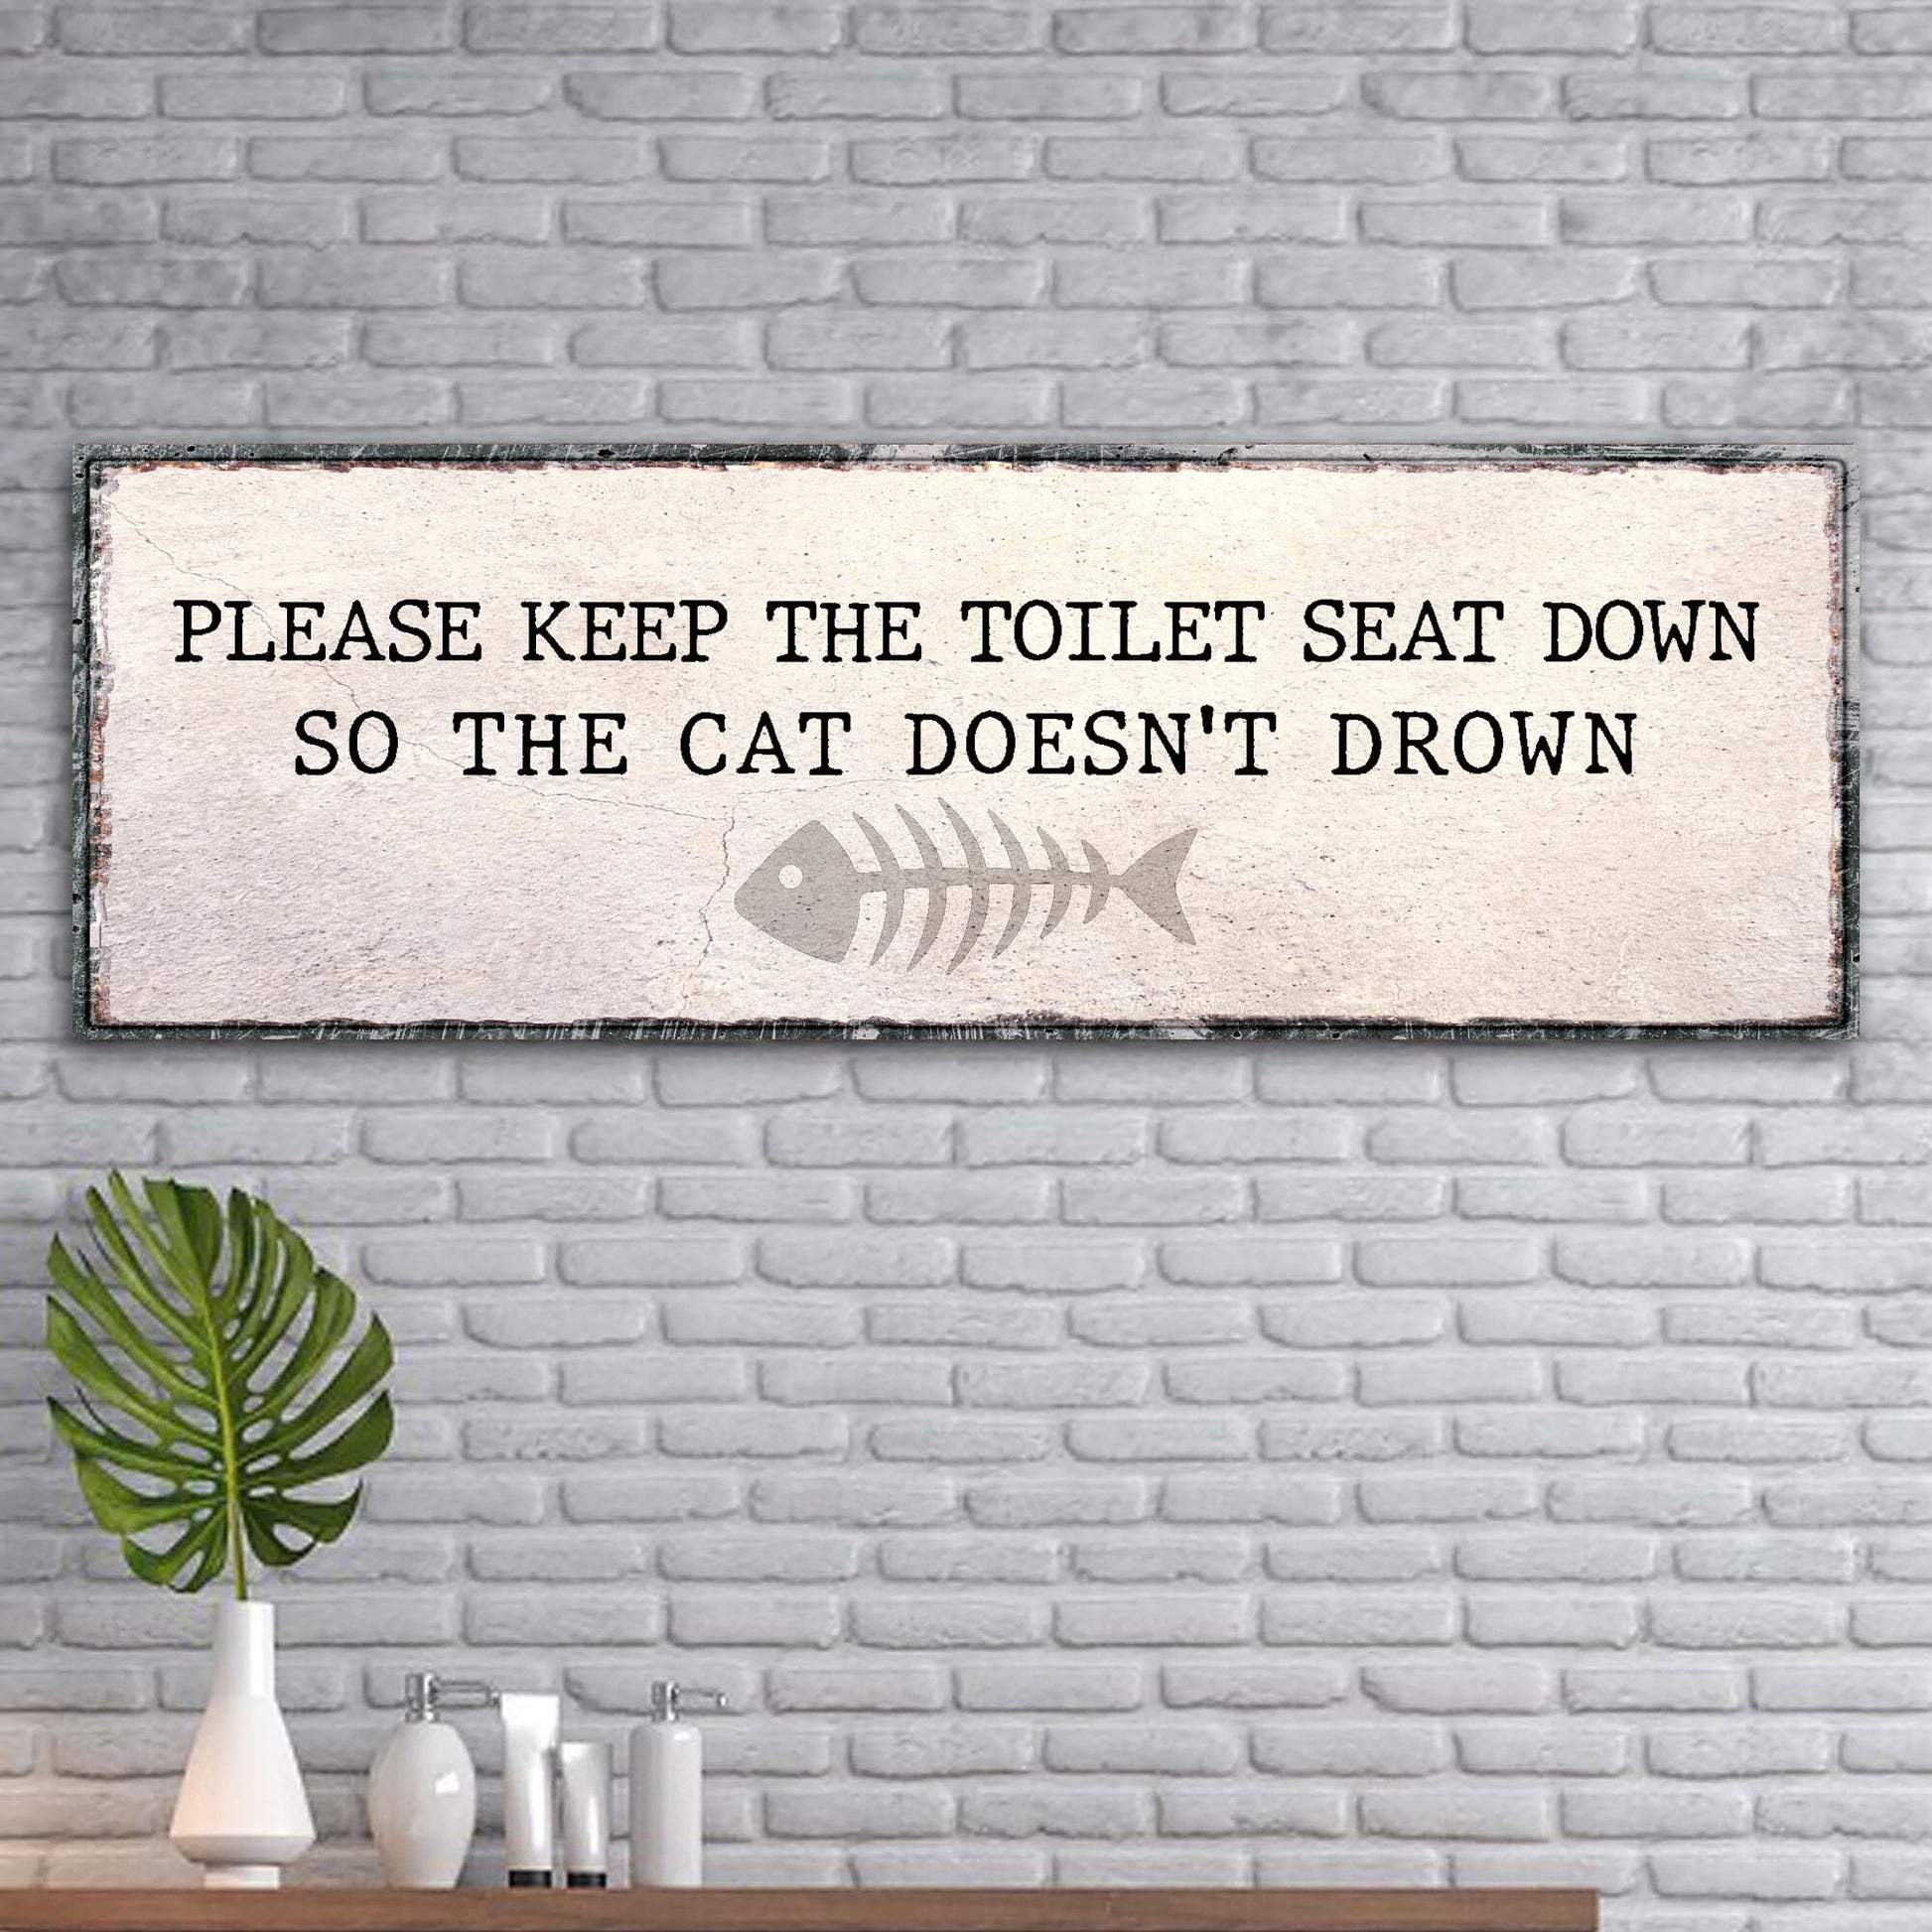 Please Keep The Toilet Seat Down So The Cat Doesn't Drown Sign II - Image by Tailored Canvases